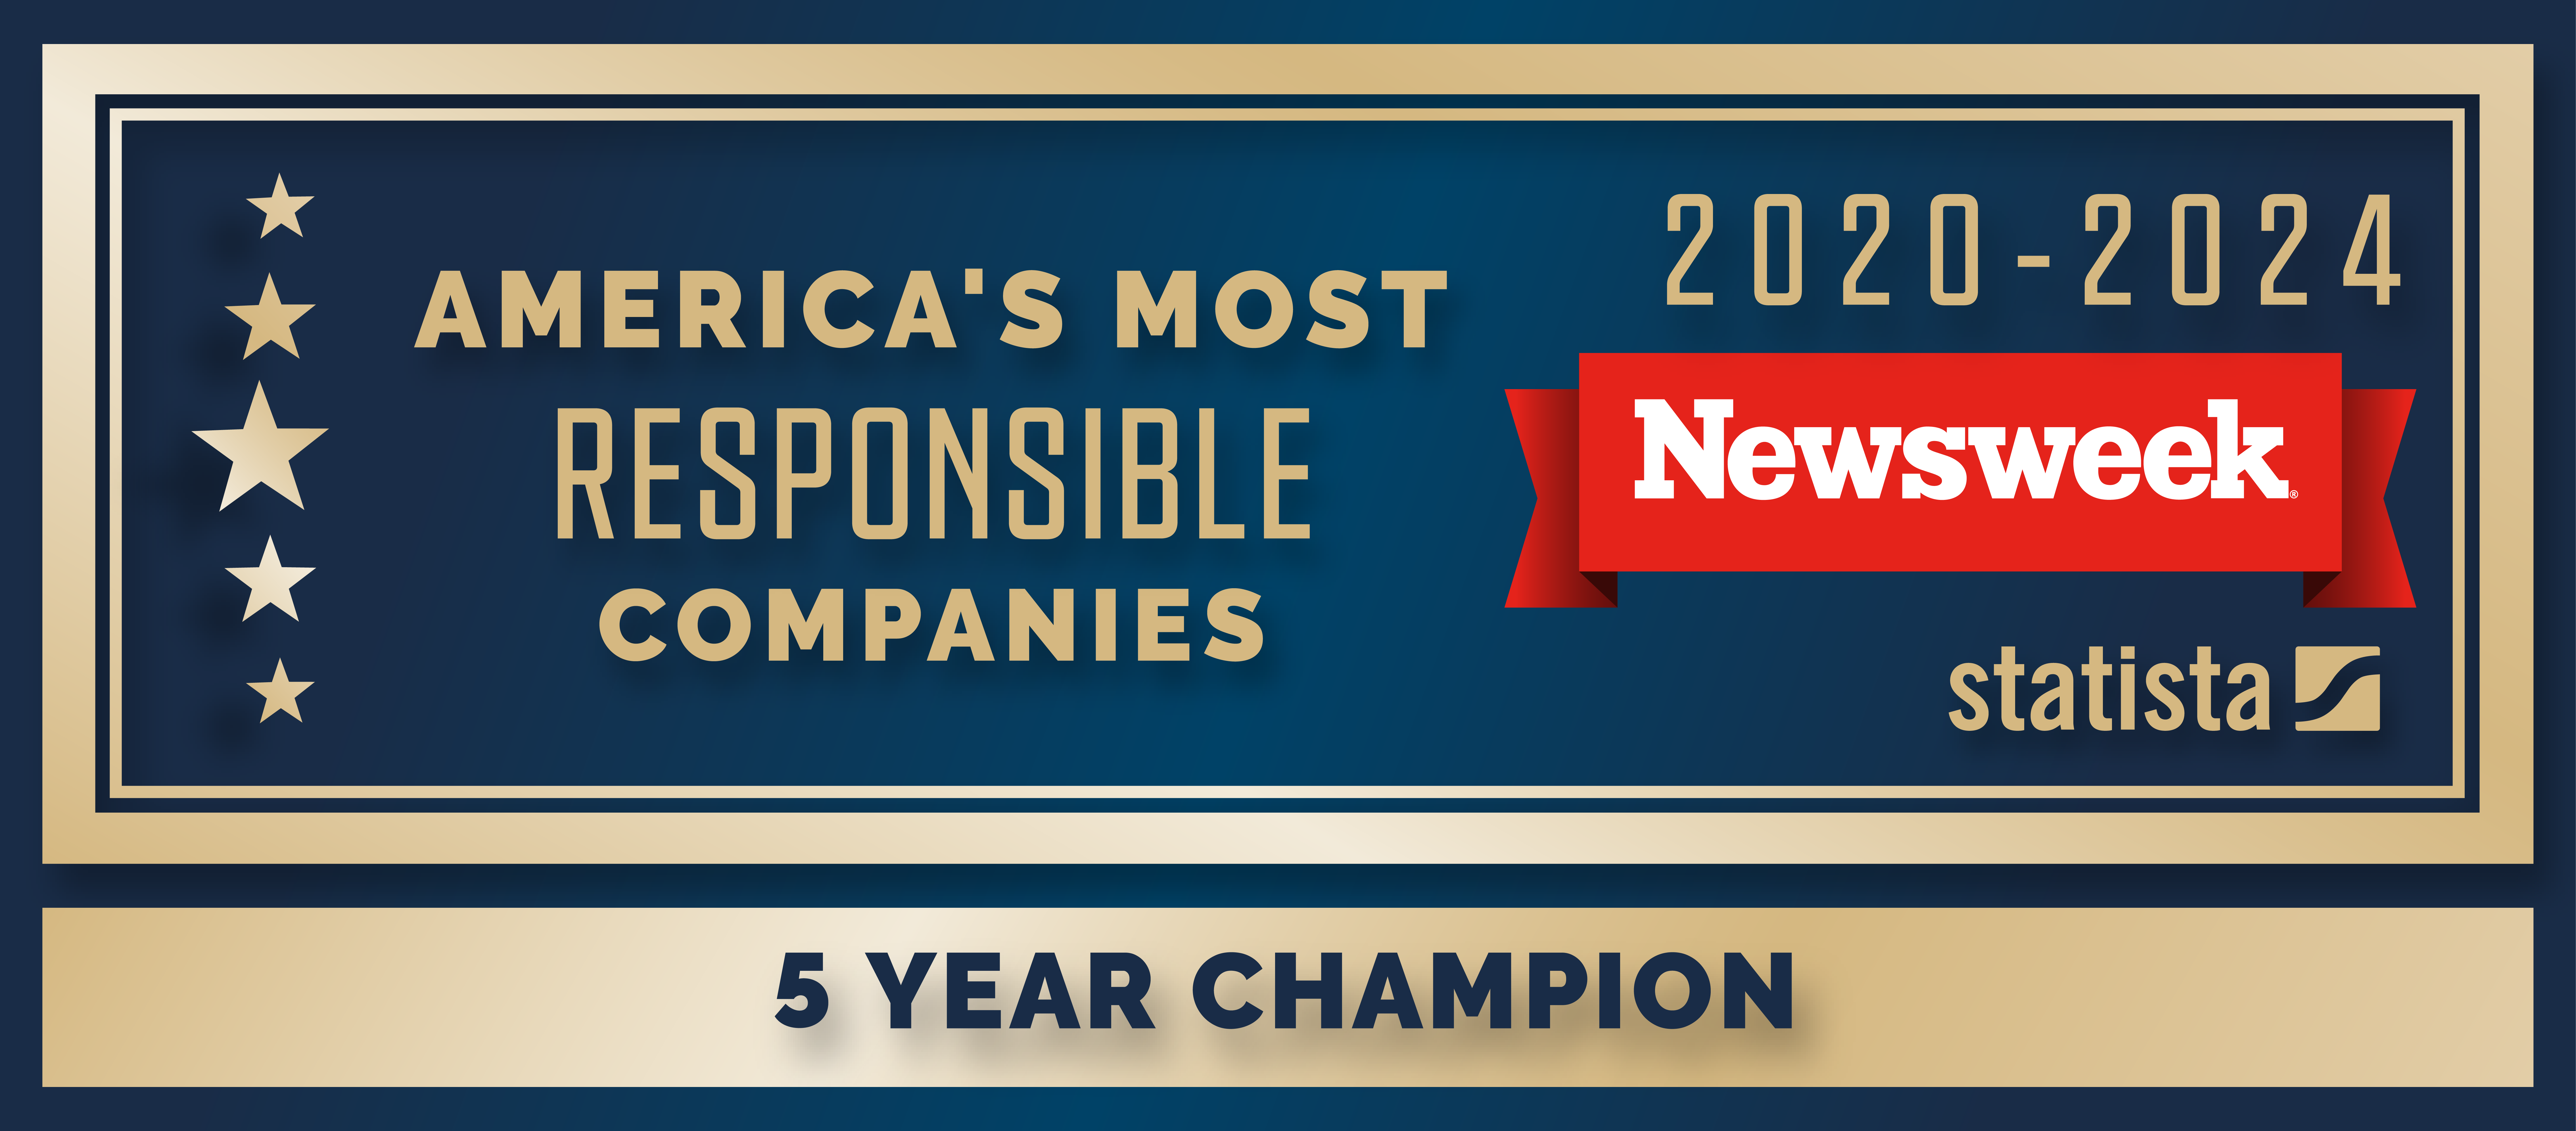 America's Most Responsible Companies 5 Year Champion